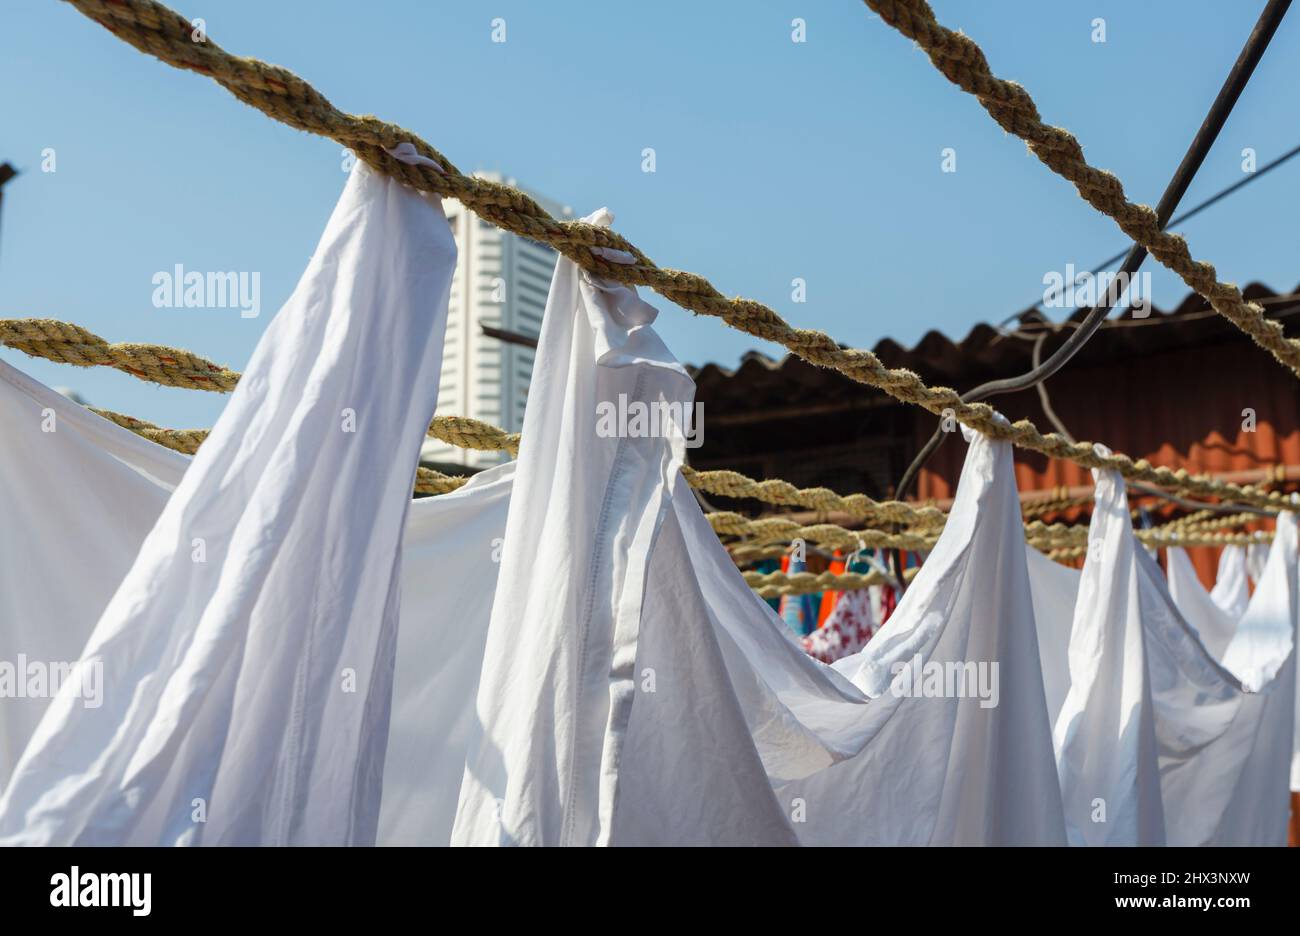 https://c8.alamy.com/comp/2HX3NXW/clean-newly-washed-white-sheets-hung-out-to-dry-drying-on-washing-line-ropes-in-mahalaxmi-dhobi-ghat-a-large-open-air-laundromat-in-mumbai-india-2HX3NXW.jpg